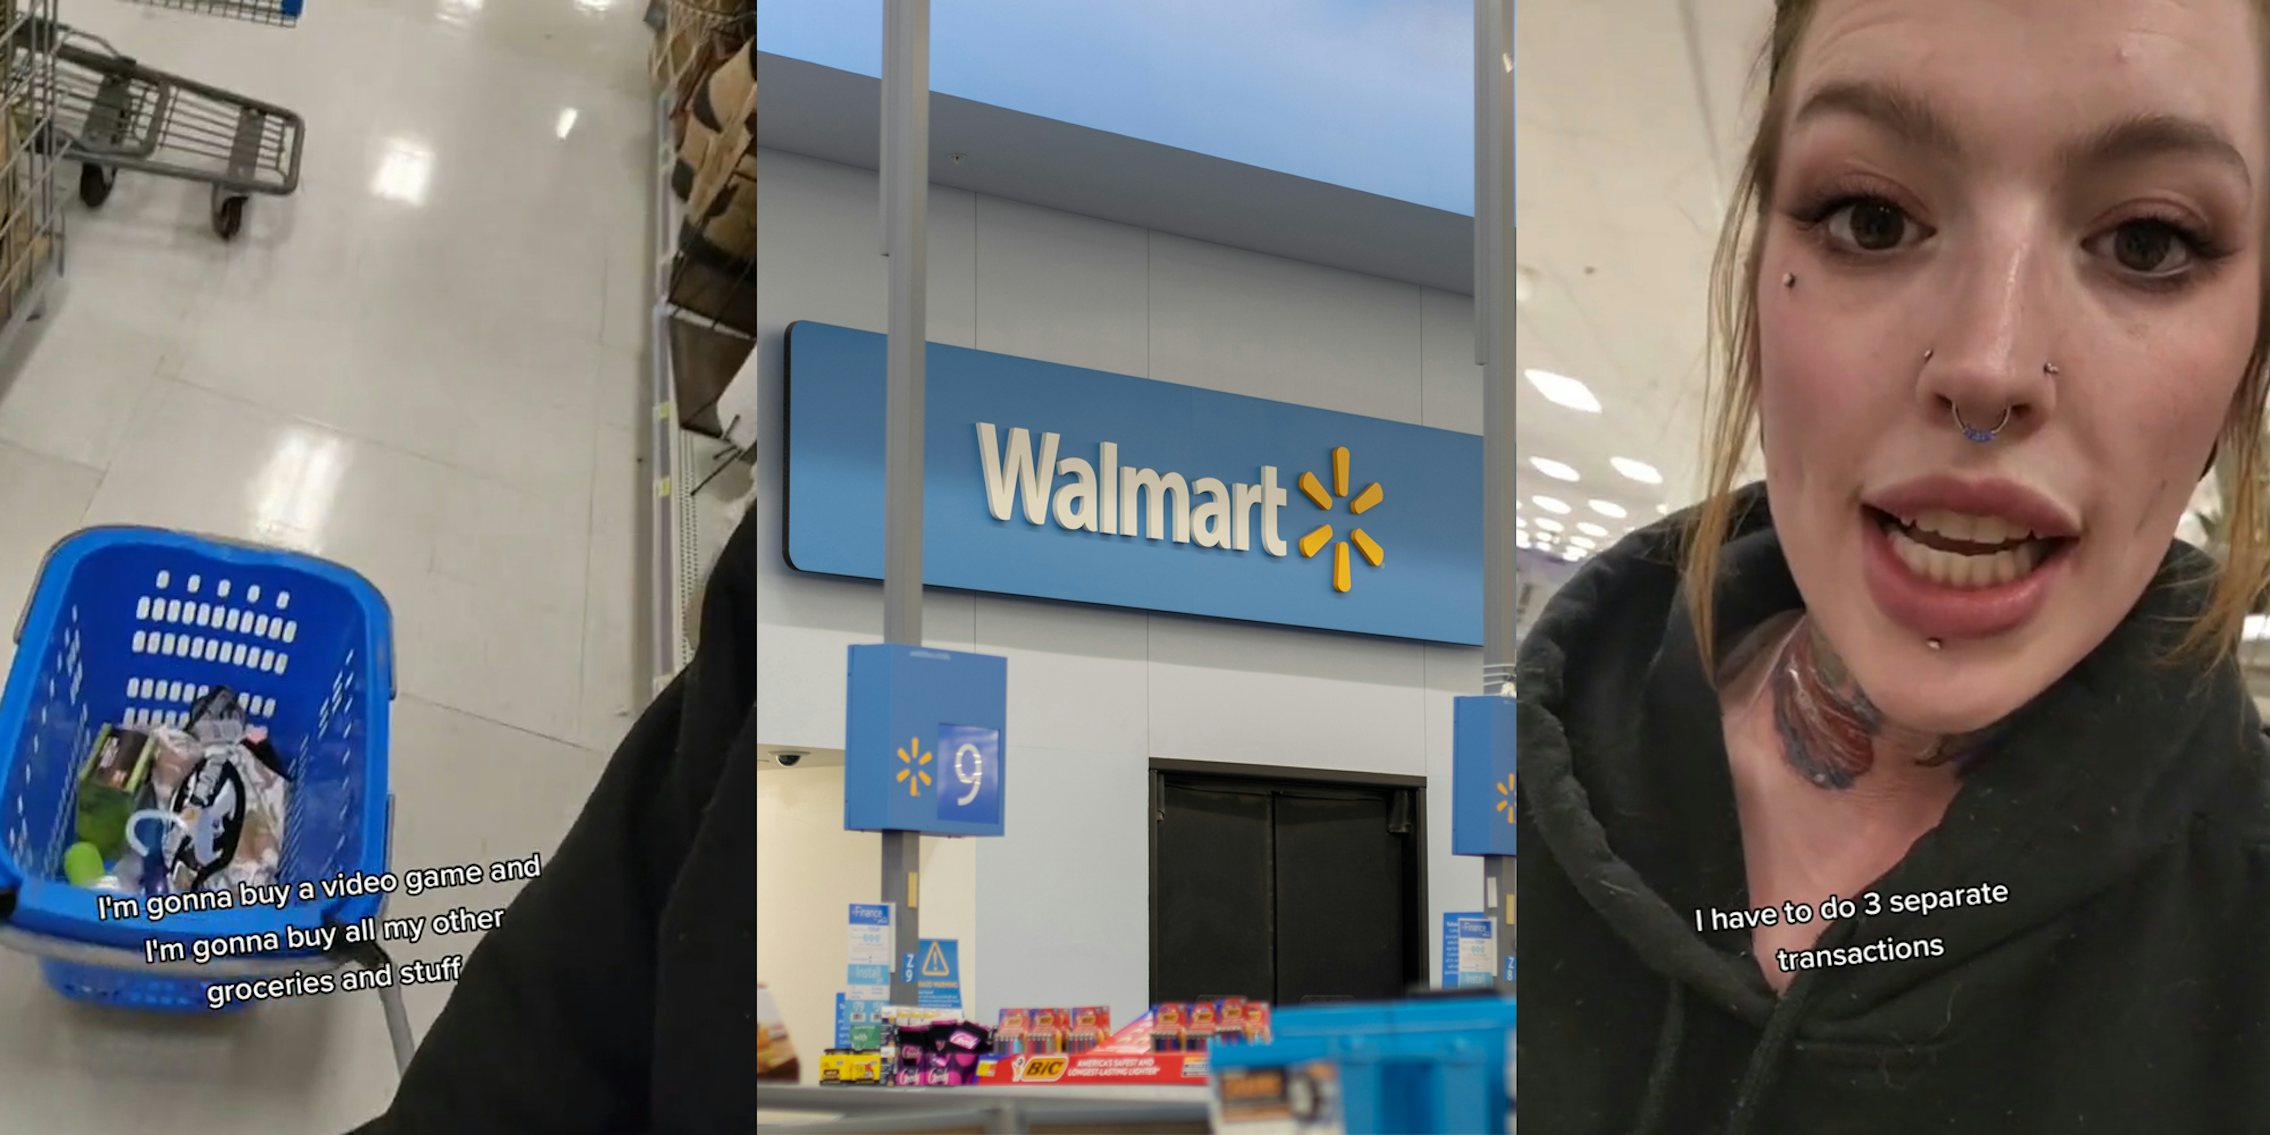 Walmart customer with cart with caption 'I'm gonna buy a video game and I'm gonna buy all my other groceries and stuff' (l) Walmart interior sign near checkout lanes (c) Walmart customer speaking with caption 'I have to do 3 separate transactions' (r)